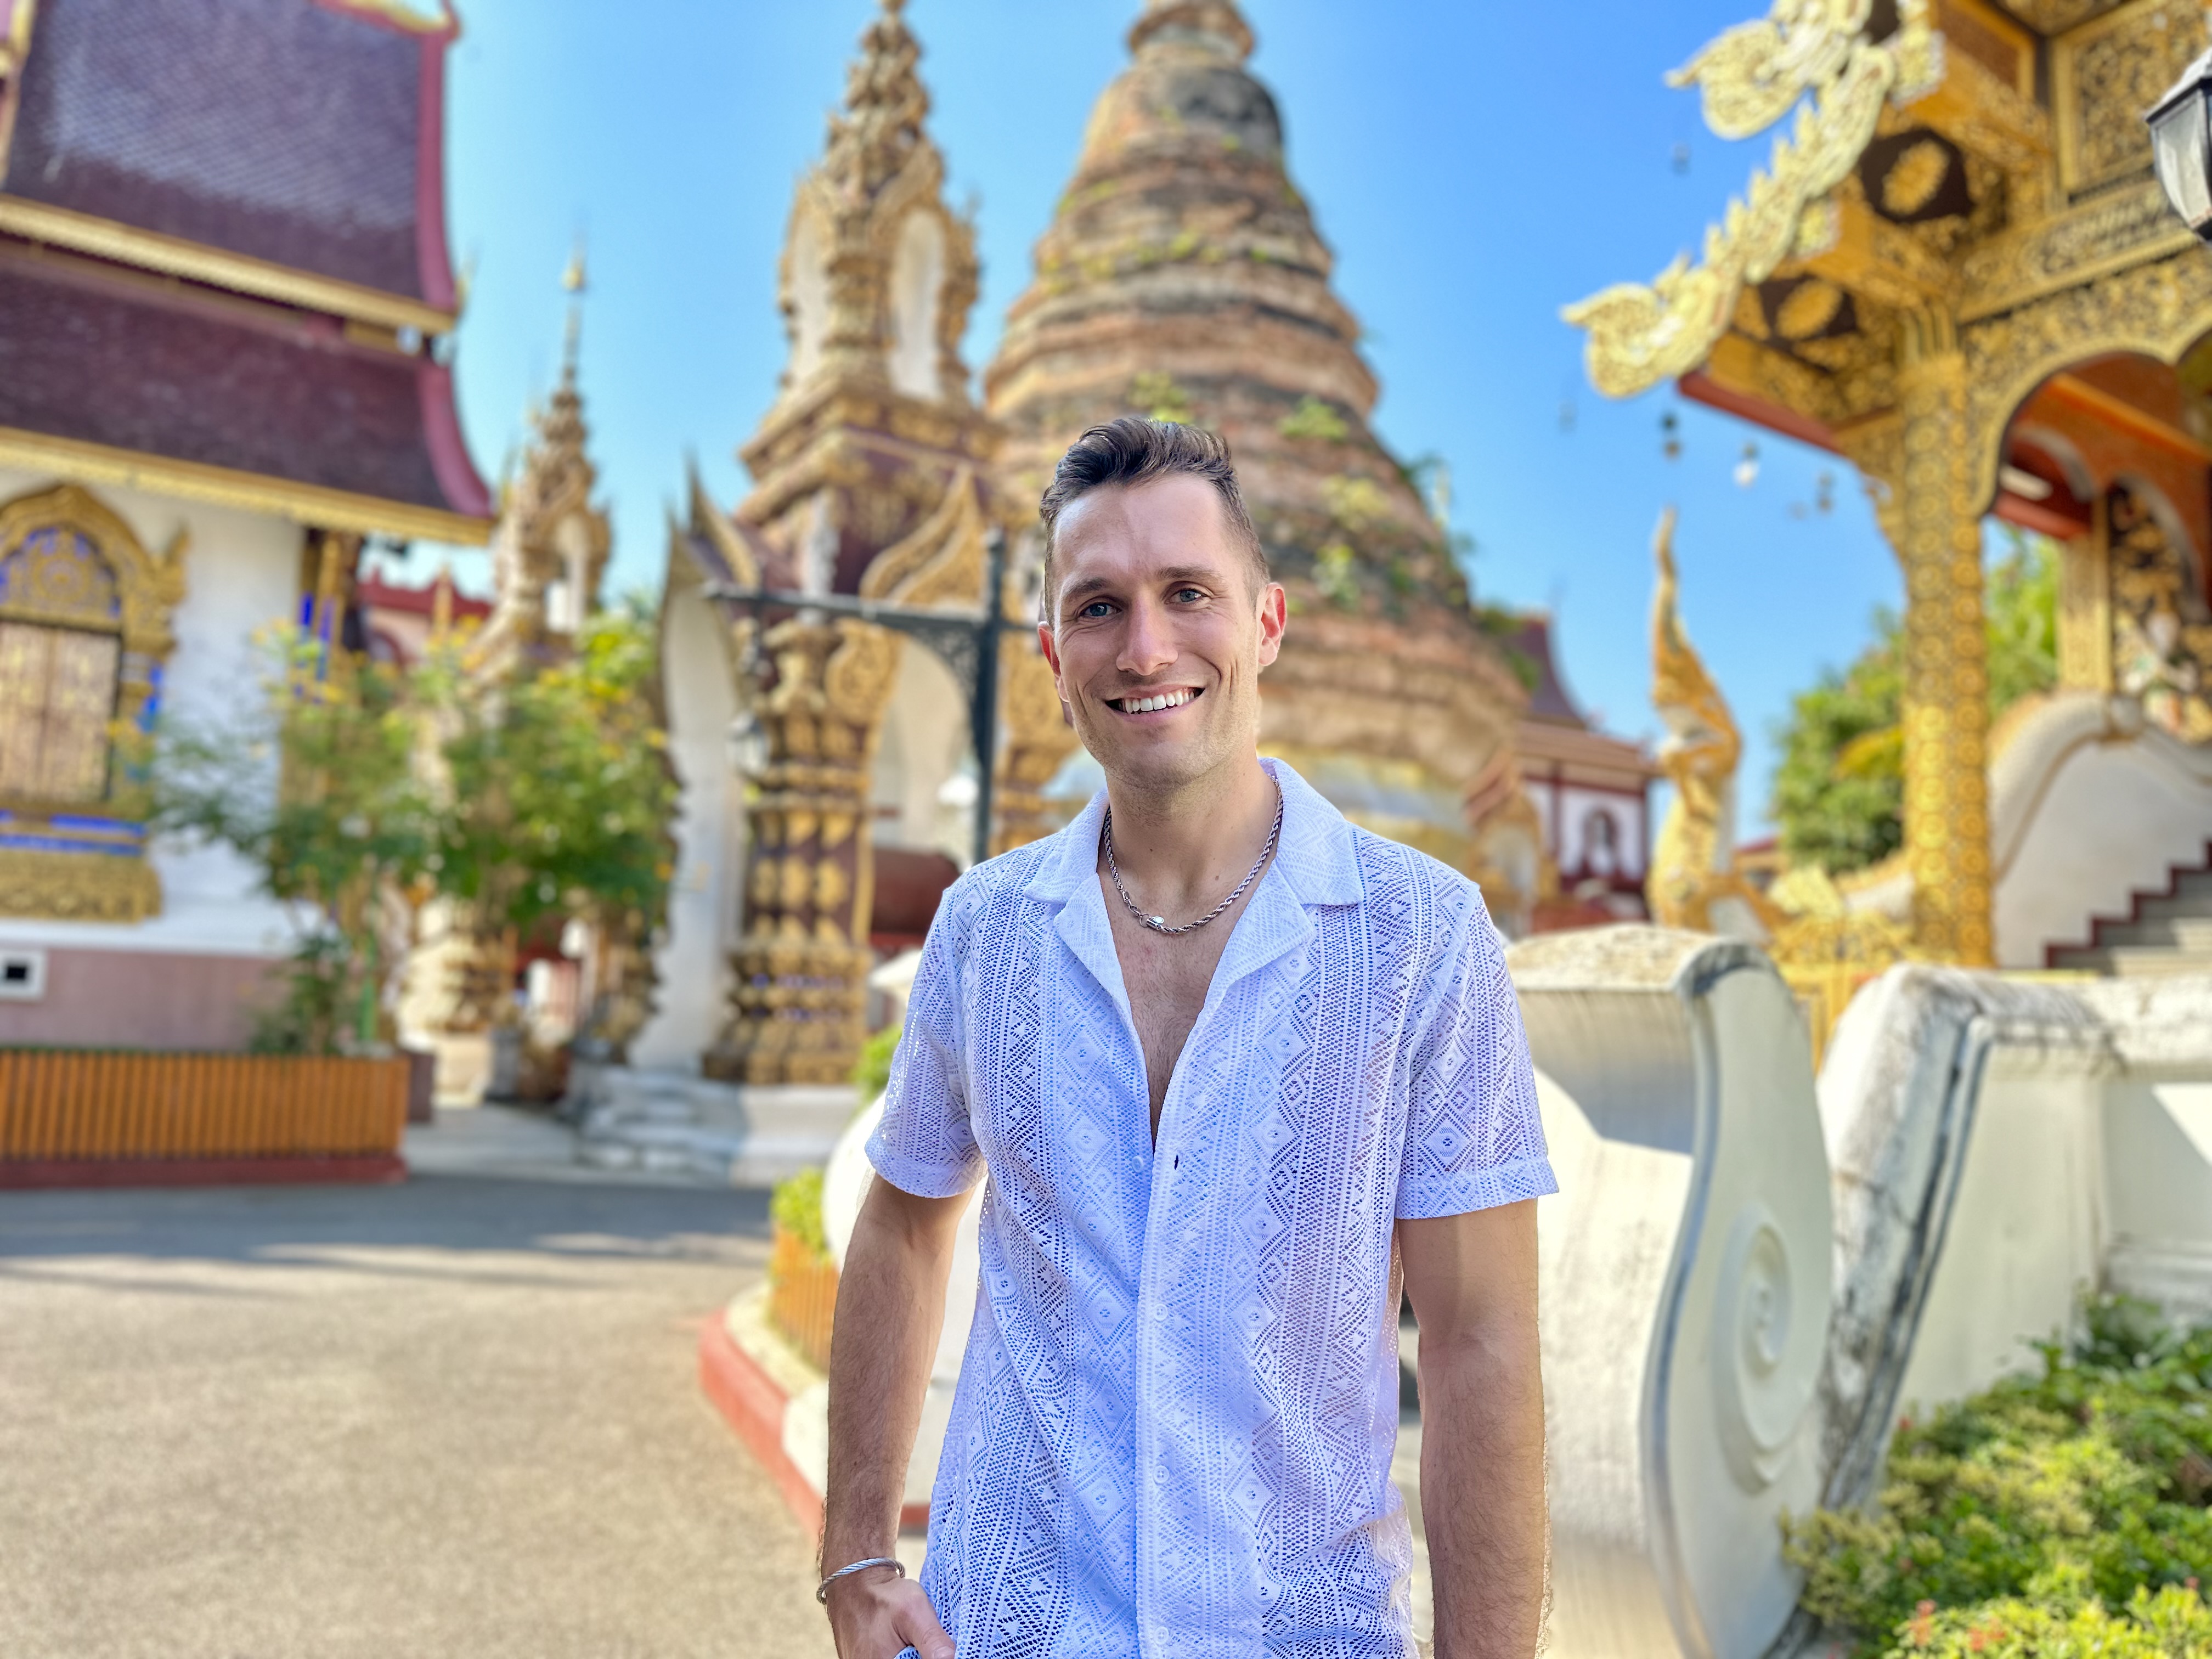 Nathen Spitz stands in front of a colorful temple in Thailand.